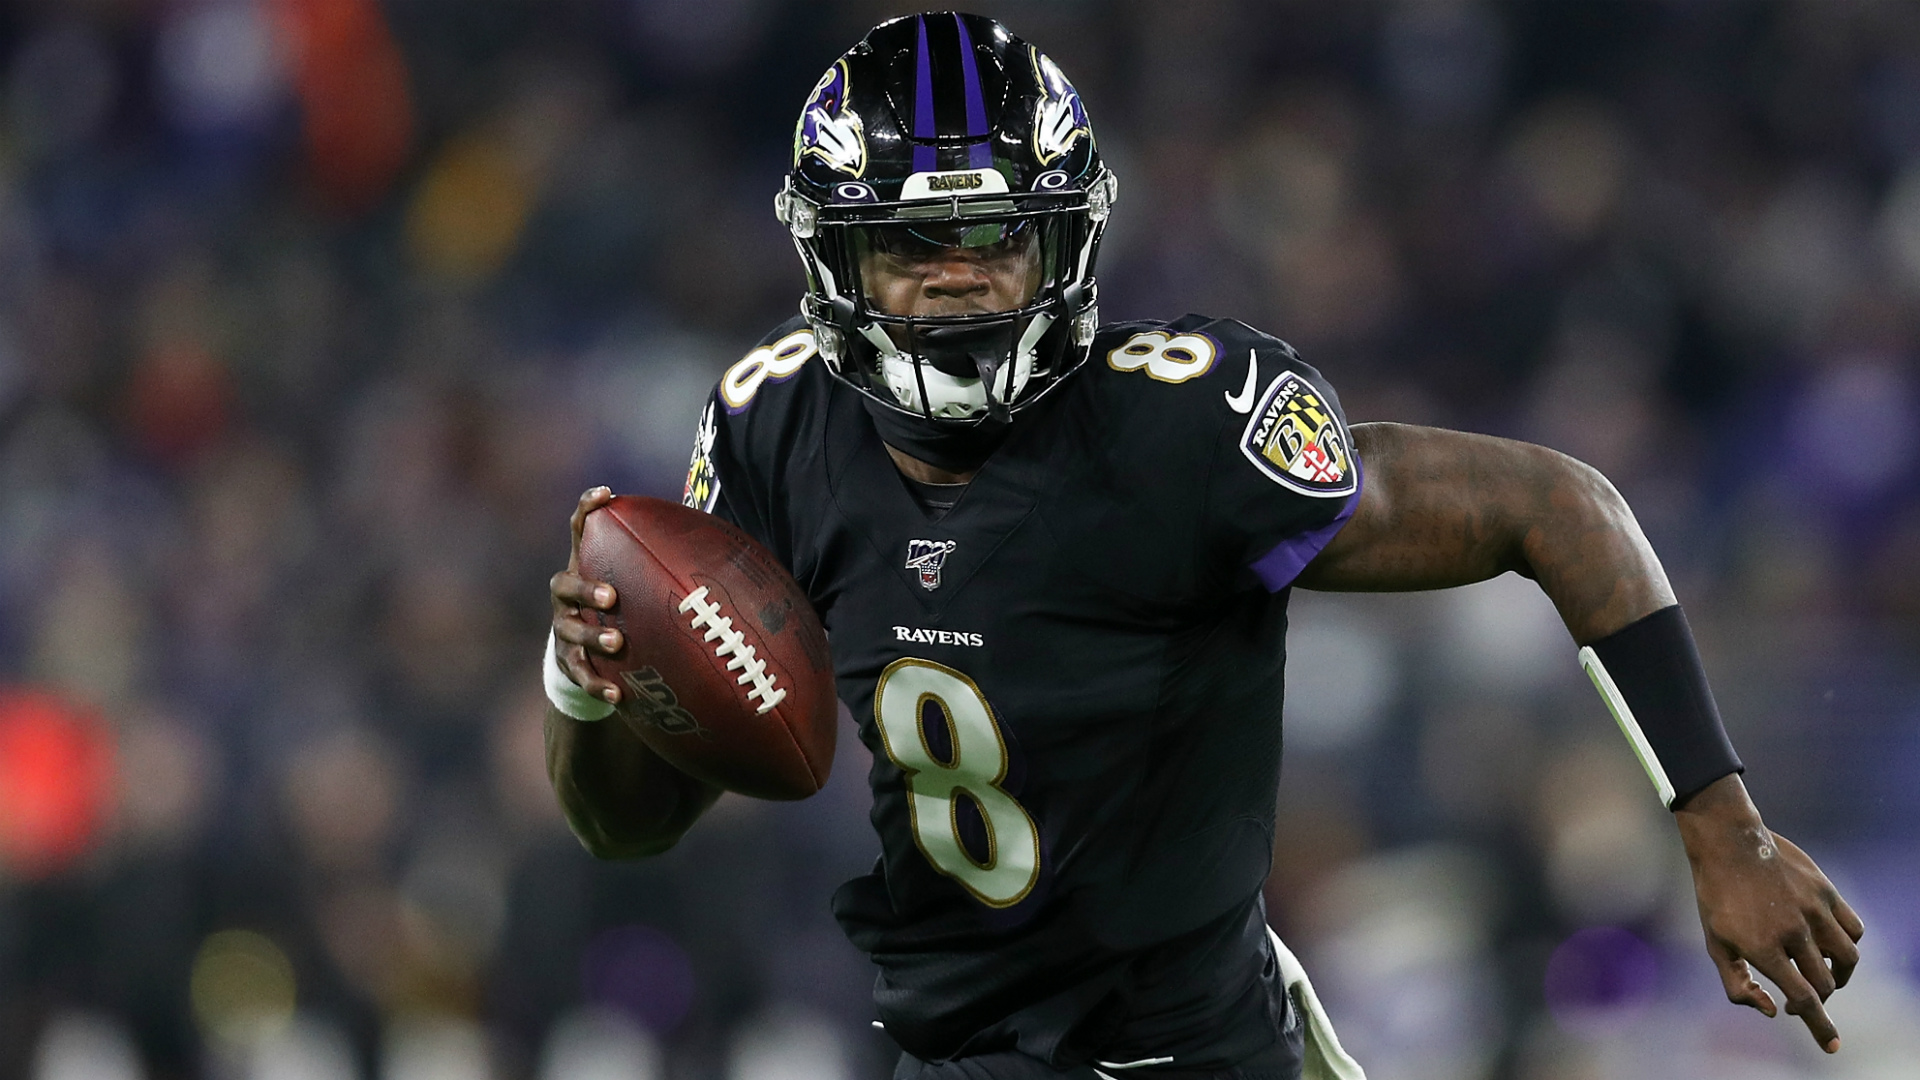 Reigning NFL MVP Lamar Jackson will appear on Madden 21 cover